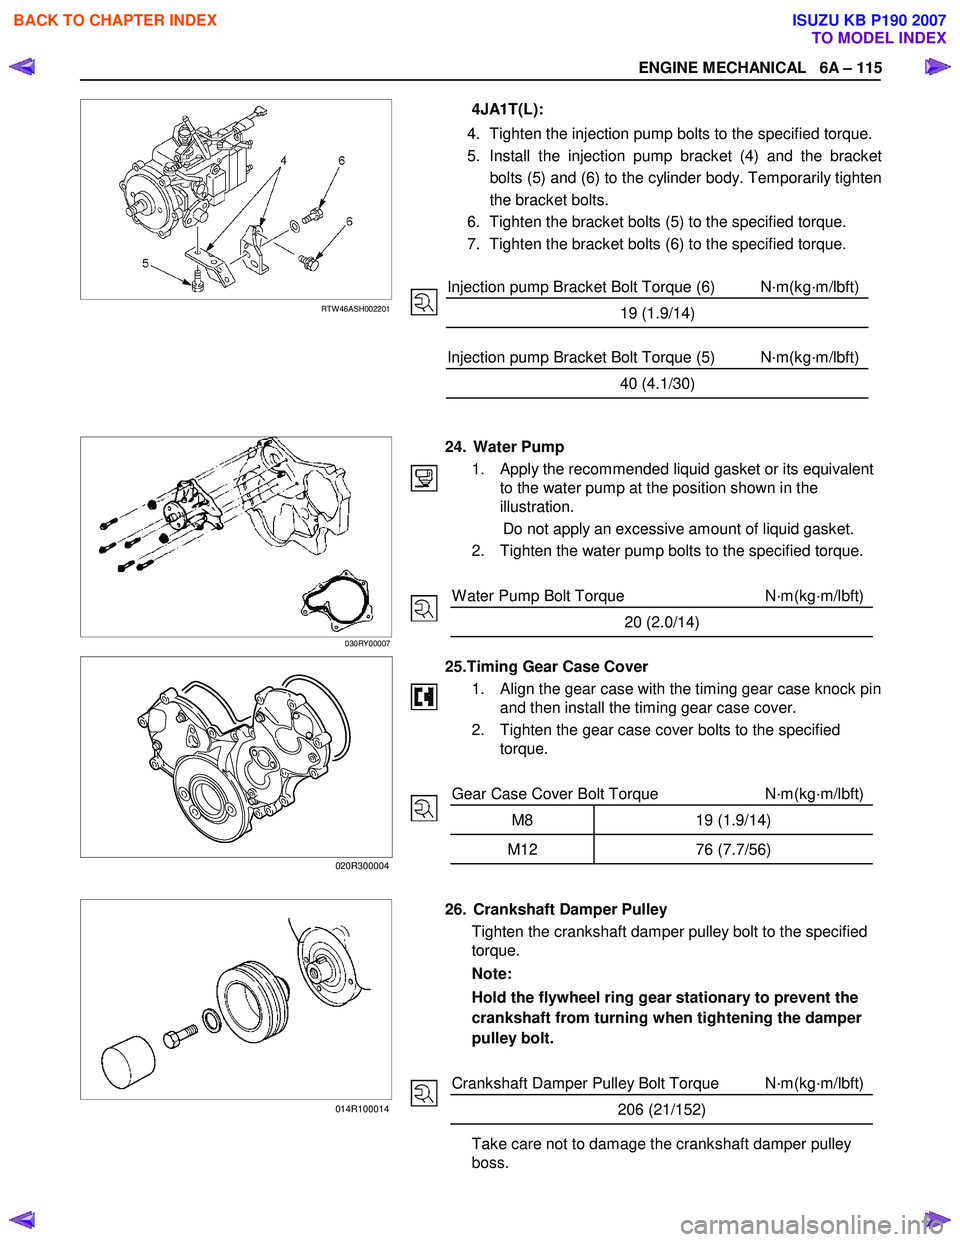 ISUZU KB P190 2007  Workshop Owners Guide ENGINE MECHANICAL   6A – 115 
   
 
 
RTW 46ASH002201    
 
 
 
 
 
 
 
 
 
 
 
 
 
 
 
 
 
 
 
 
4JA1T(L): 
4.  Tighten the injection pump bolts to the specified torque. 
5.  Install the injection 